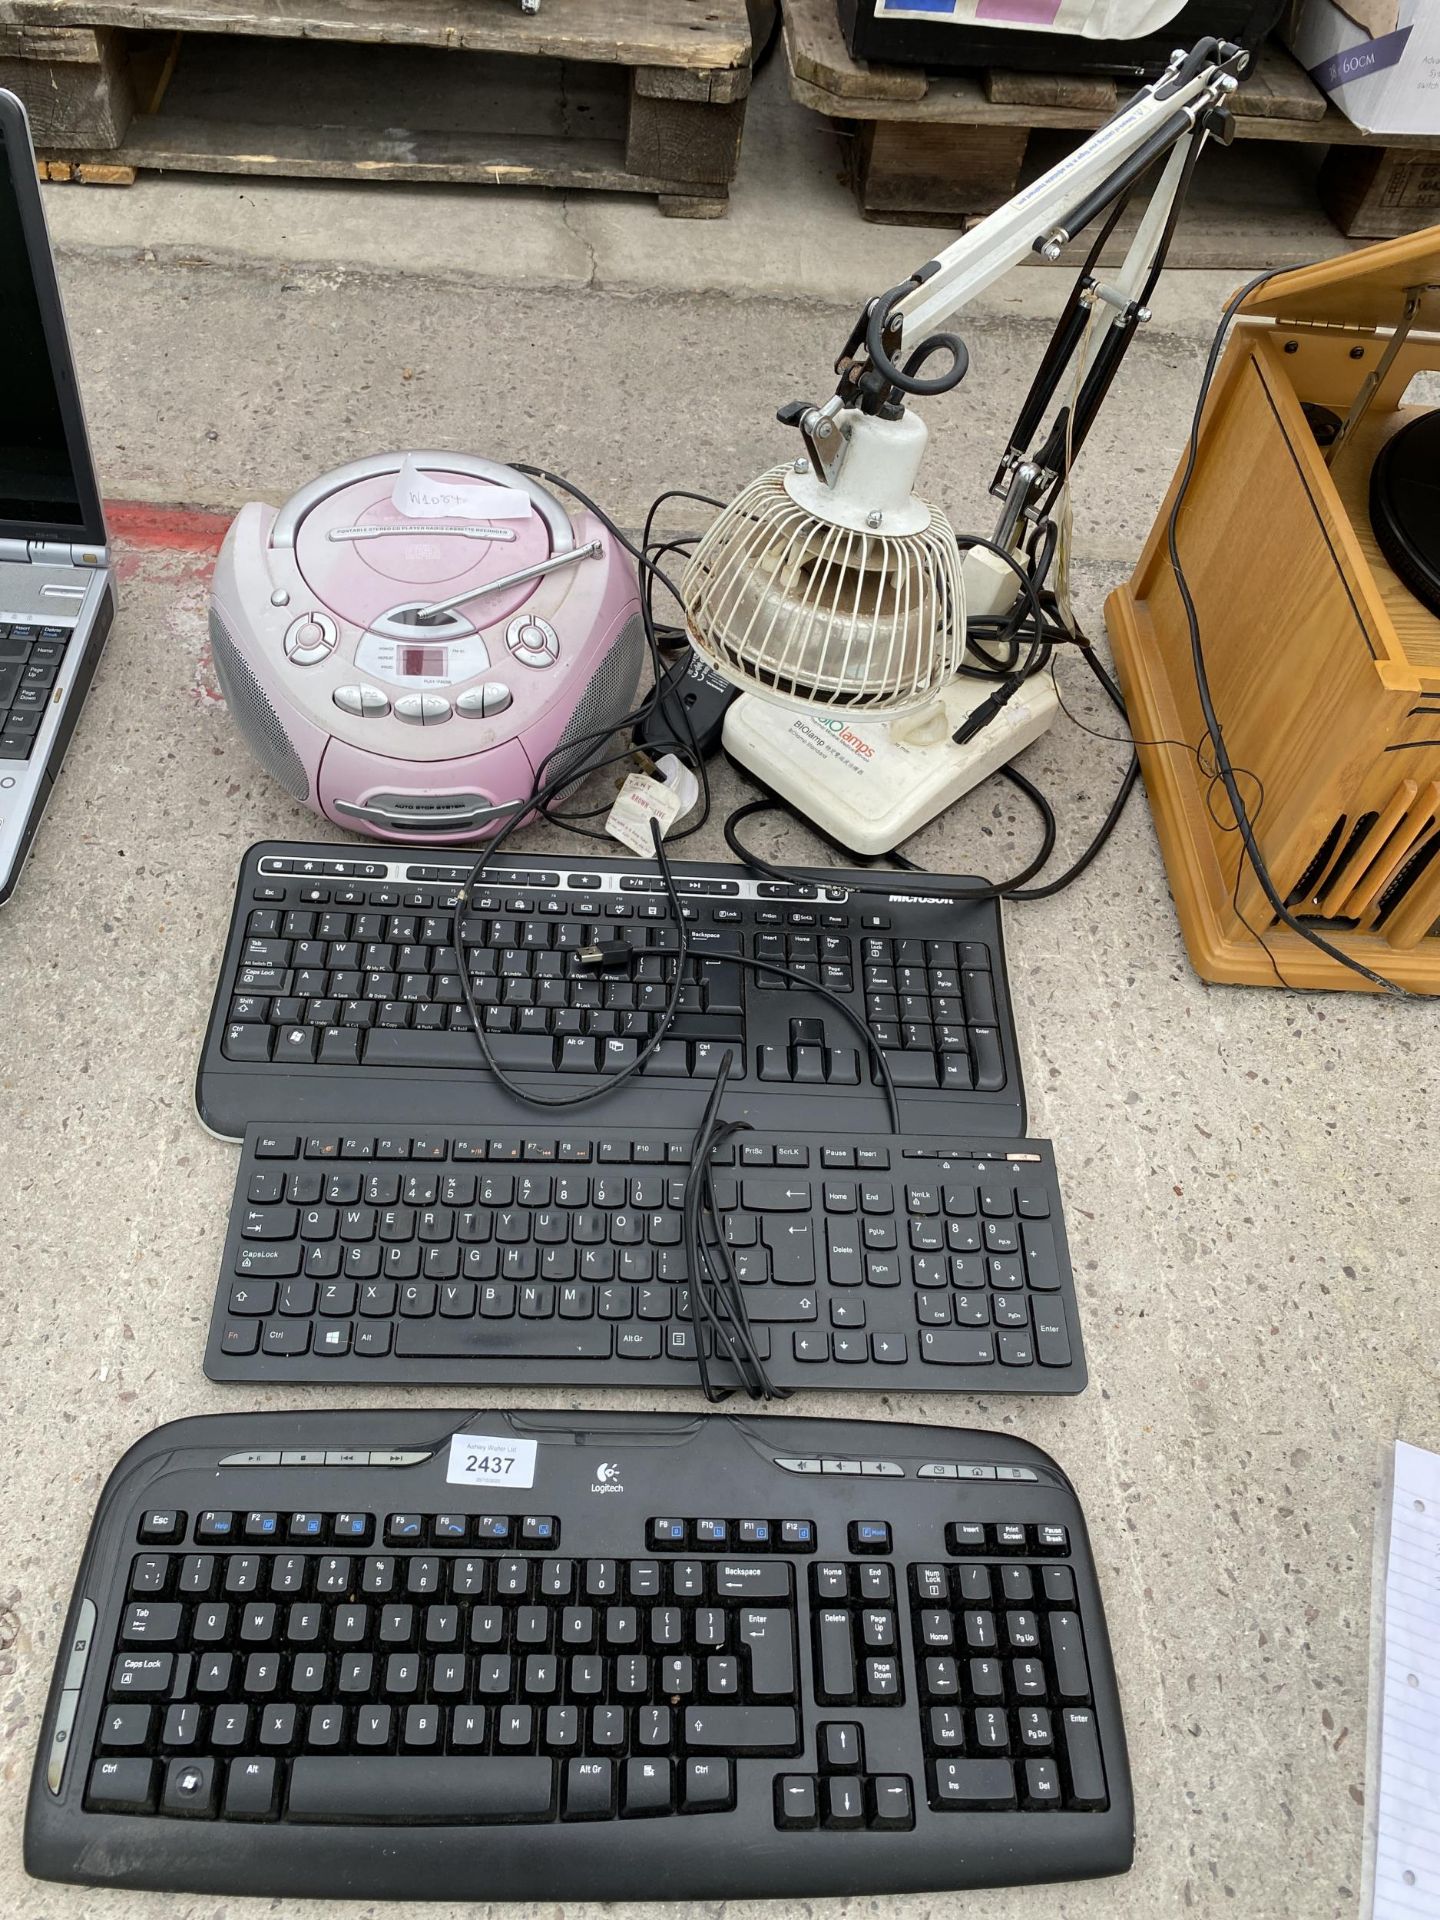 AN ASSORTMENT OF ITEMS TO INCLUDE AN ANGLE POISE LAMP AND COMPUTER KEYBOARDS ETC